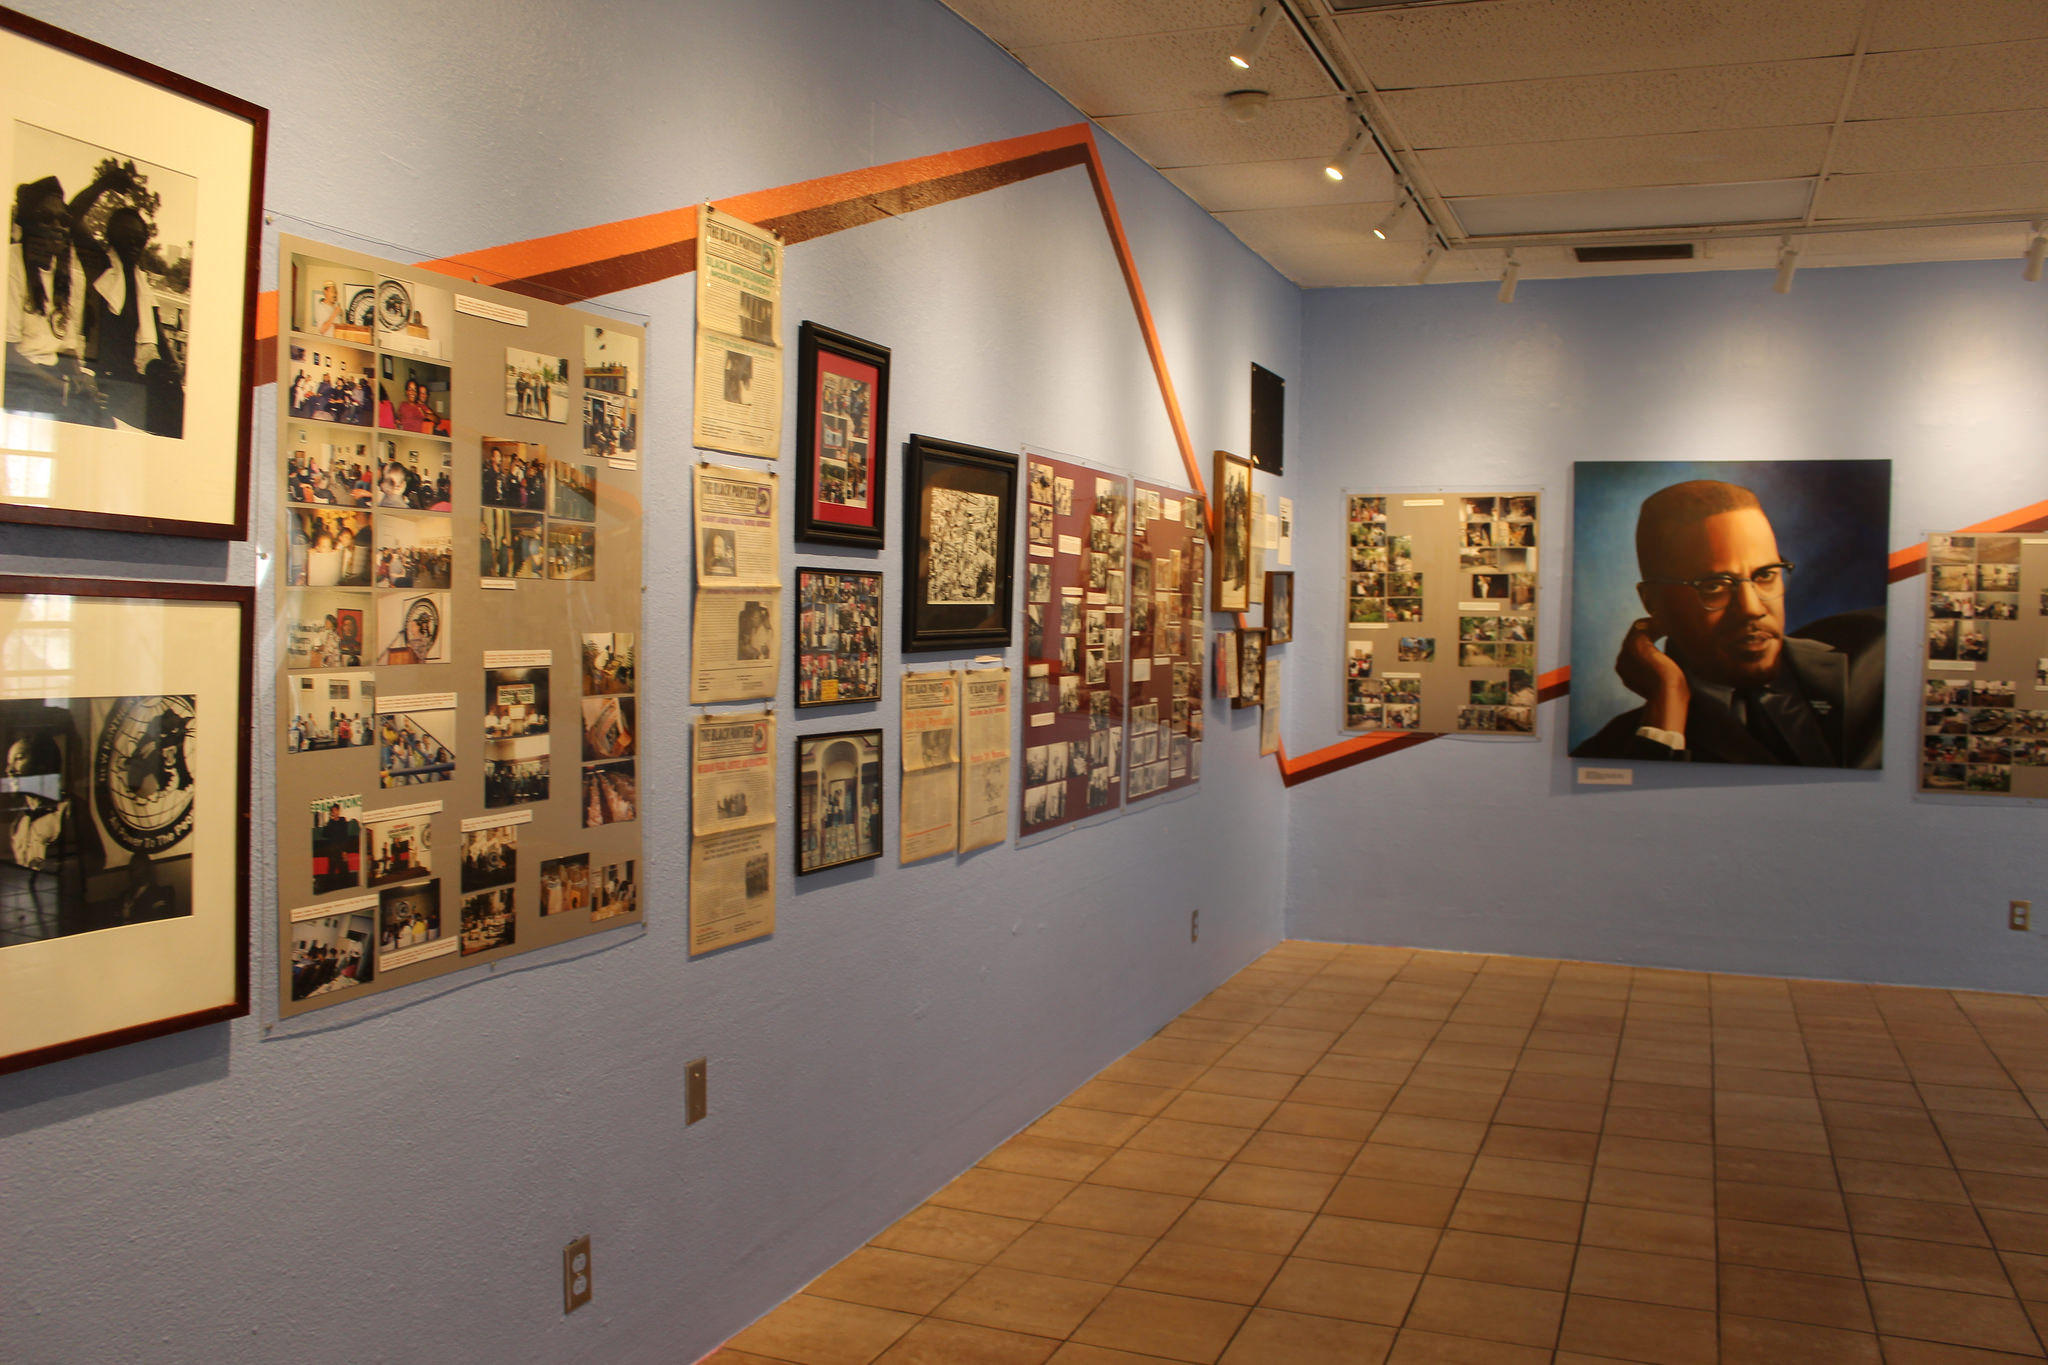 Installation view, The West Adams Collectors Club: Collecting, Archiving and Exhibiting Your Own Cultural History at the William Grant Still Arts Center, Los Angeles, 2015. Courtesy of the William Grant Still Arts Center.